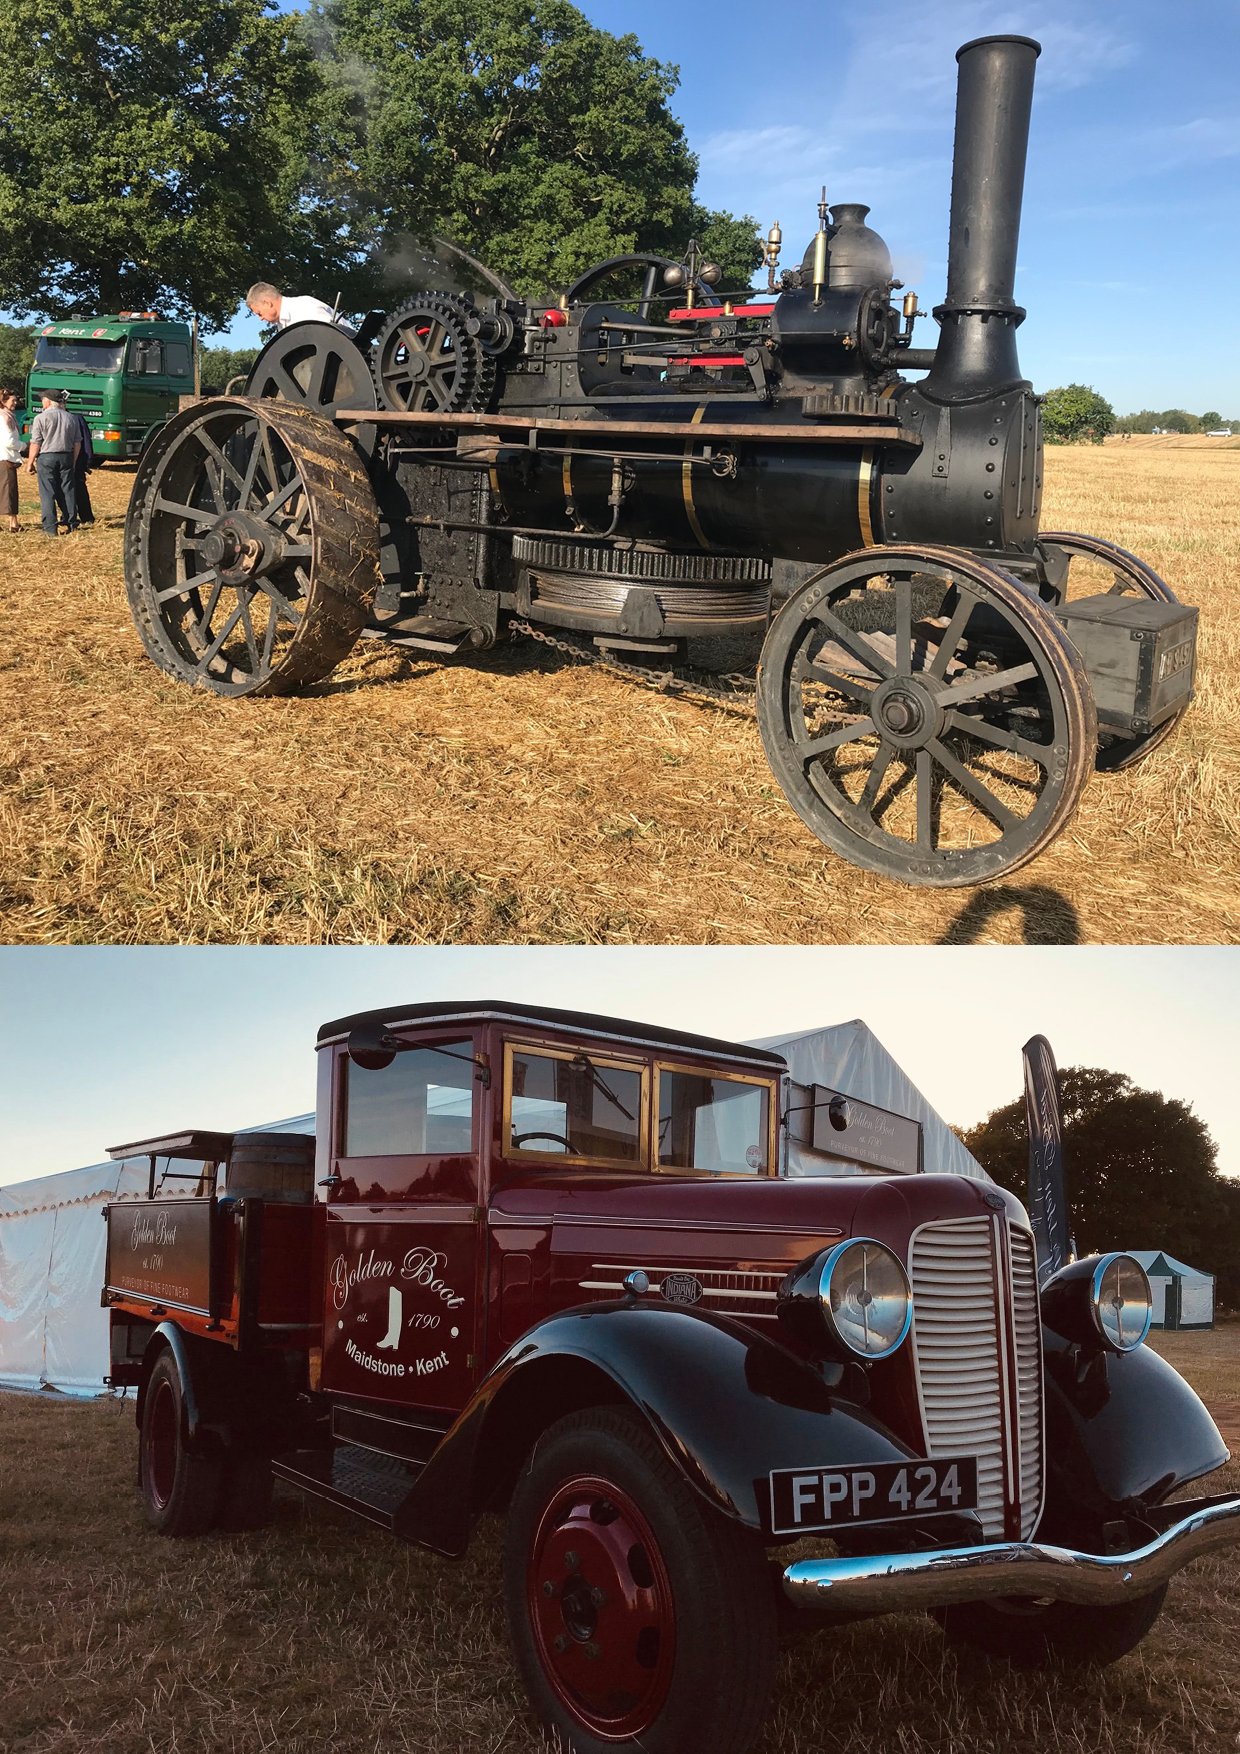 The Weald of Kent Ploughing Match ’19